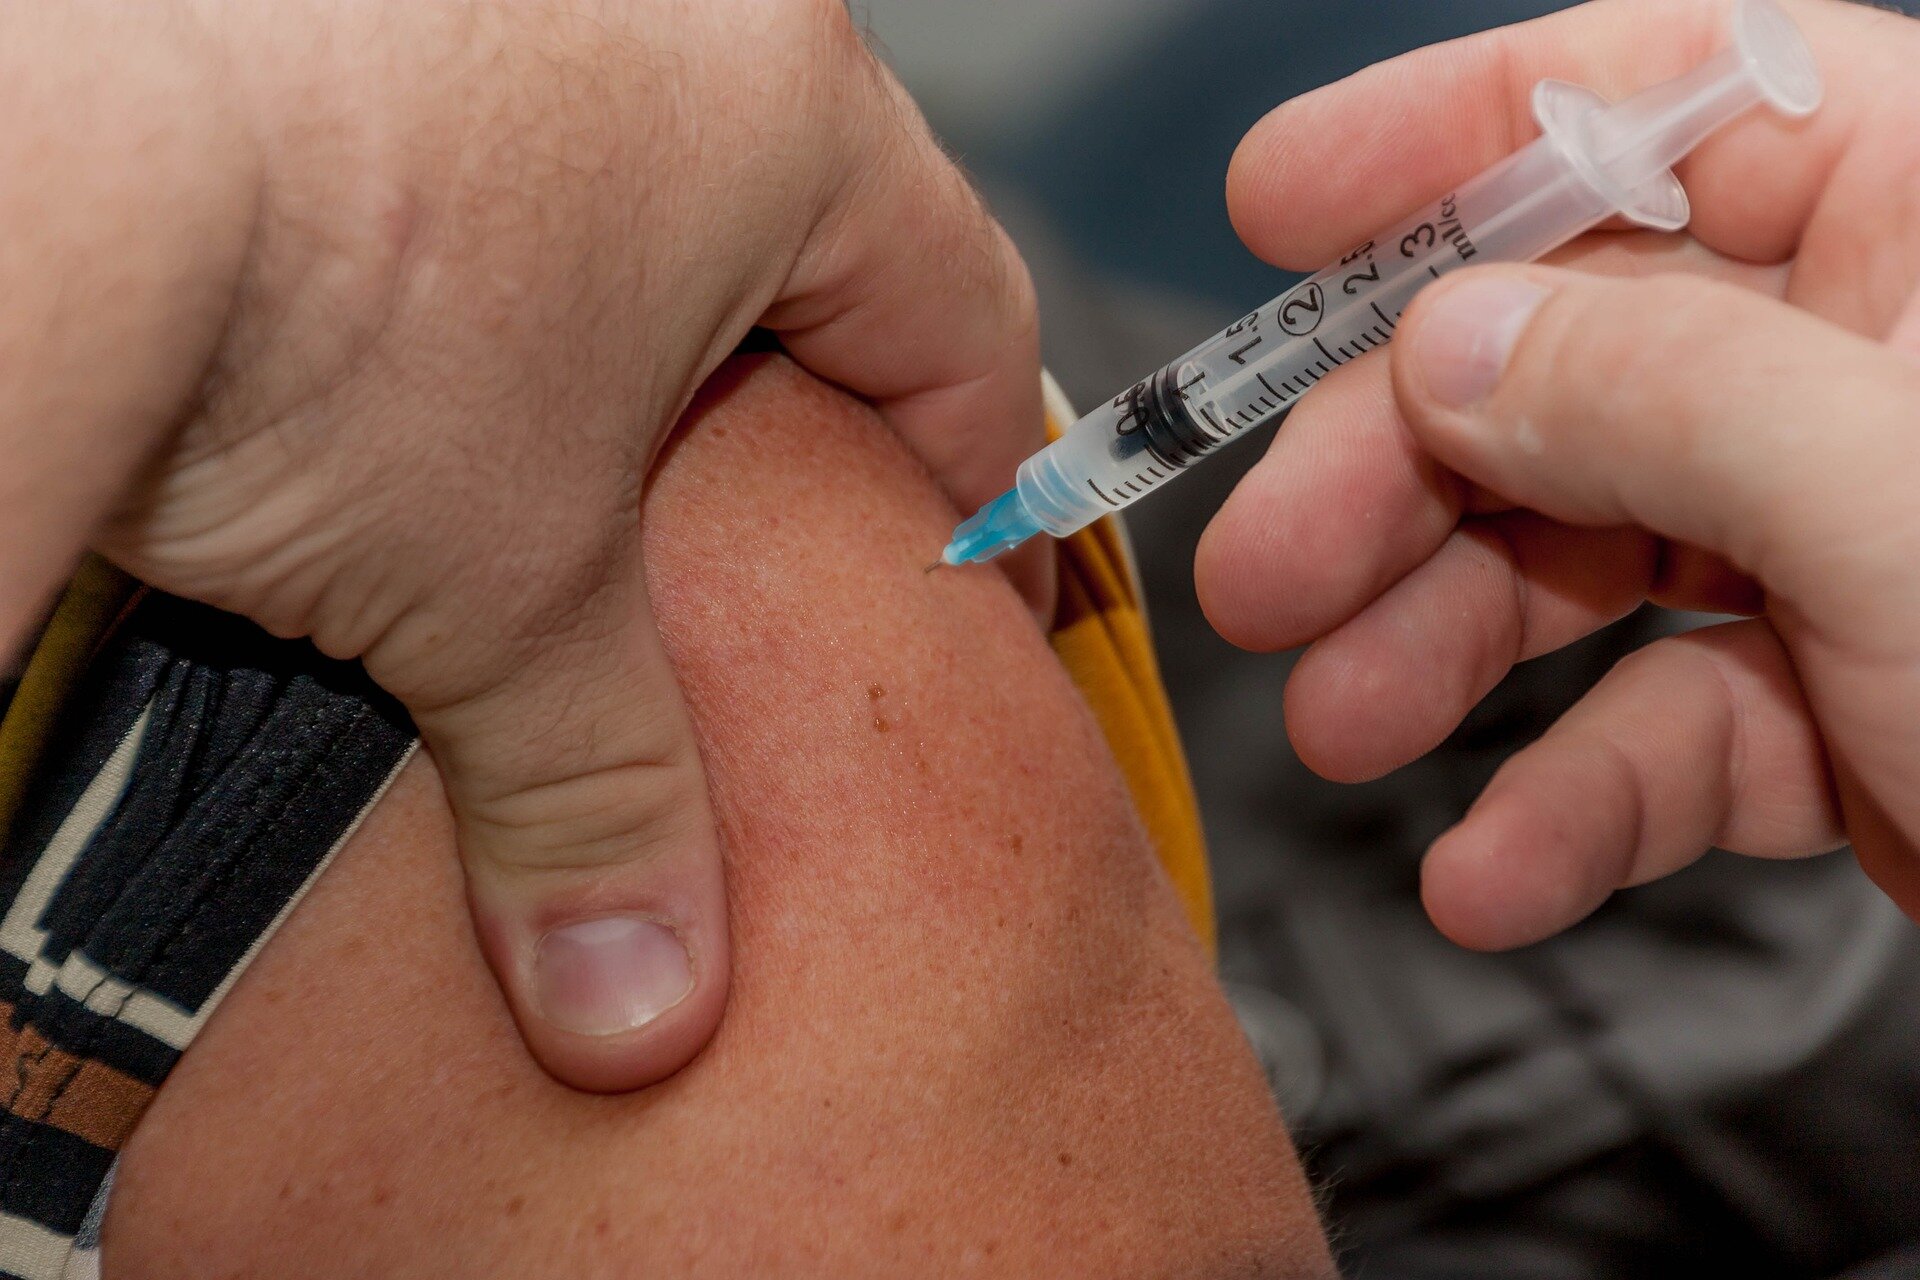 #Survey finds breakthrough COVID-19 cases occur in 7.5% of vaccinated Texans